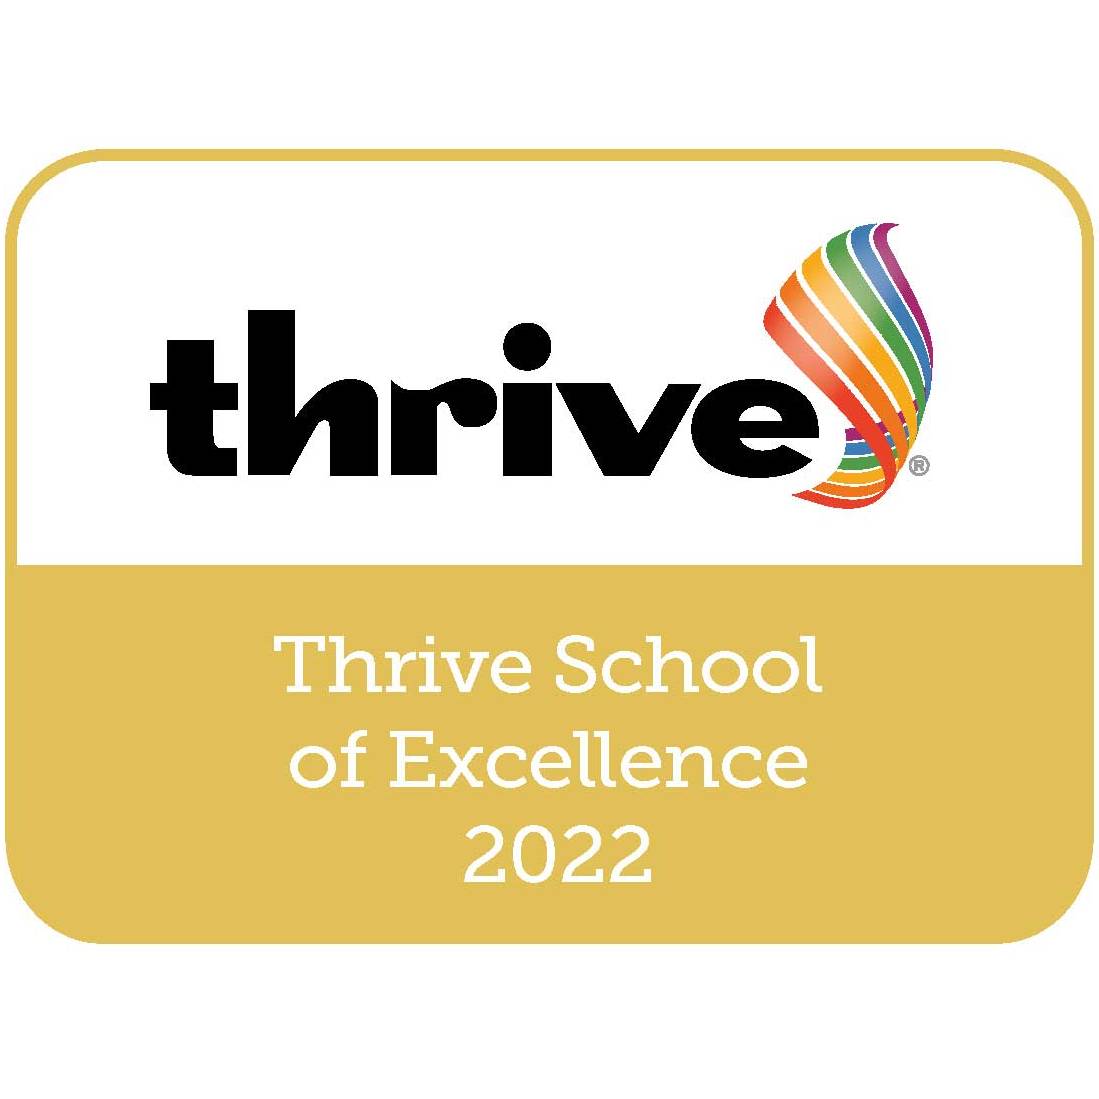 Thrive School of Excellence 2022